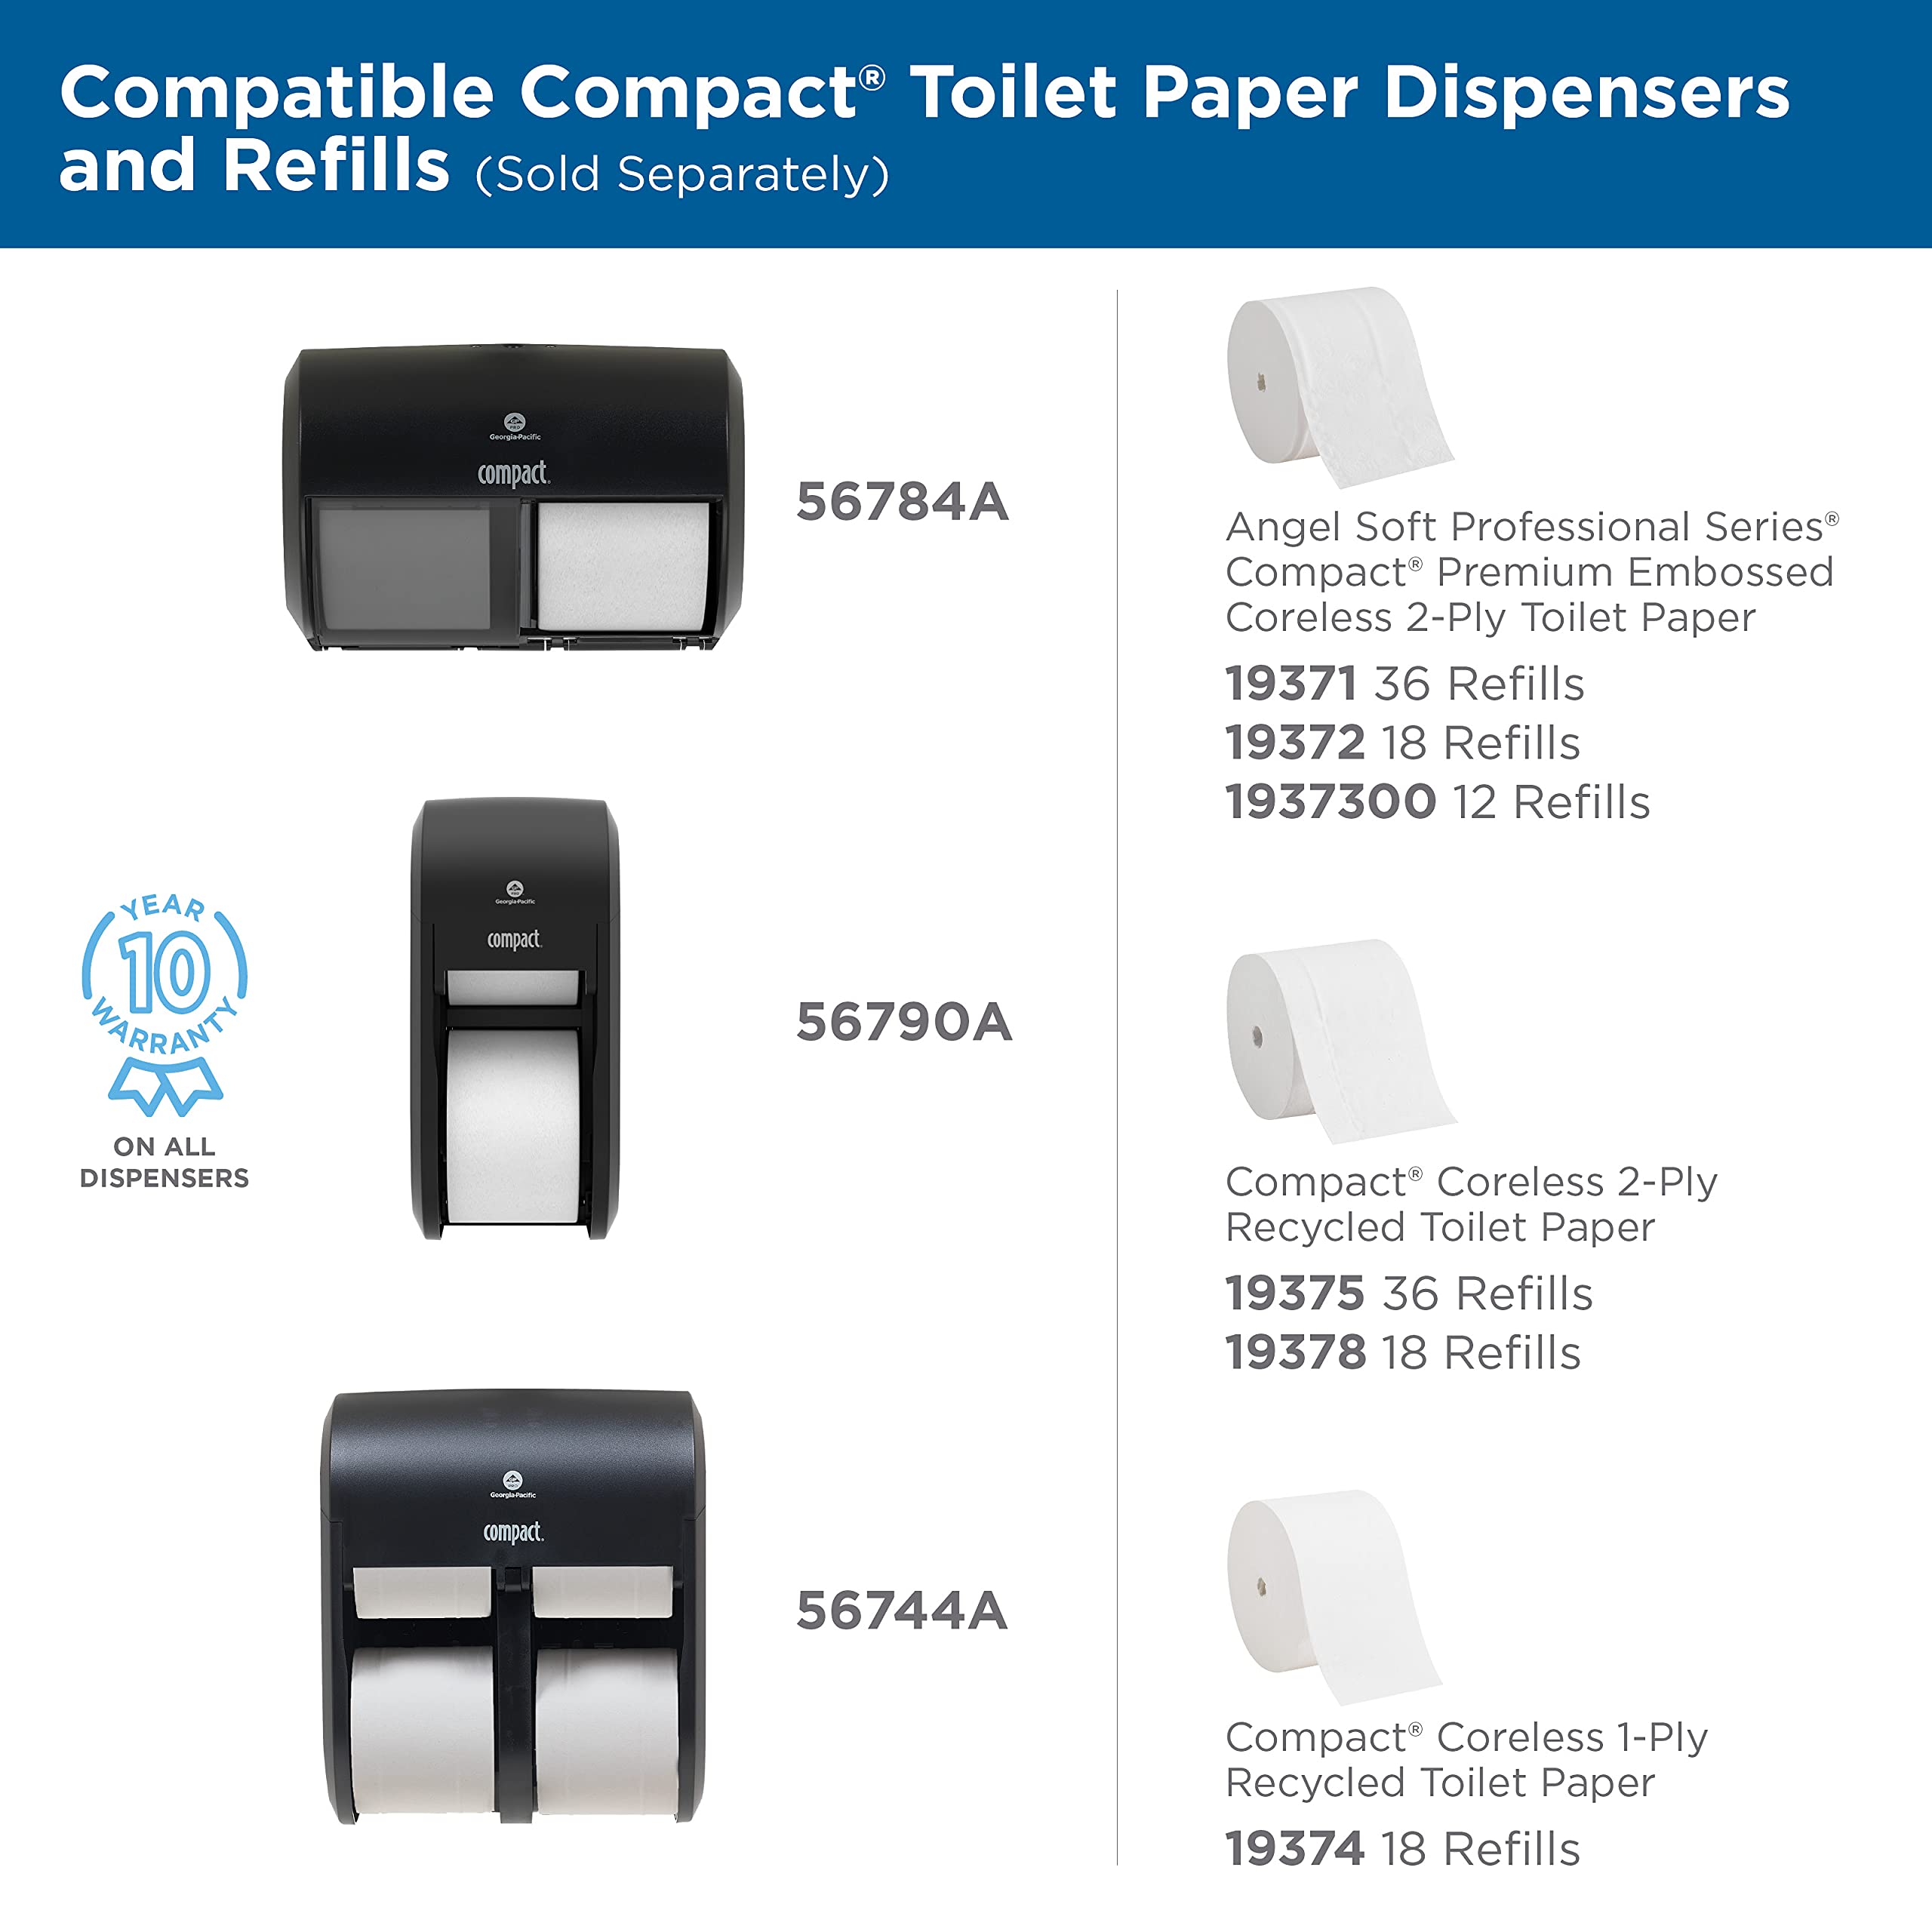 Buy Compact Coreless 2-Ply Recycled Toilet Paper by GP PRO (Georgia ...